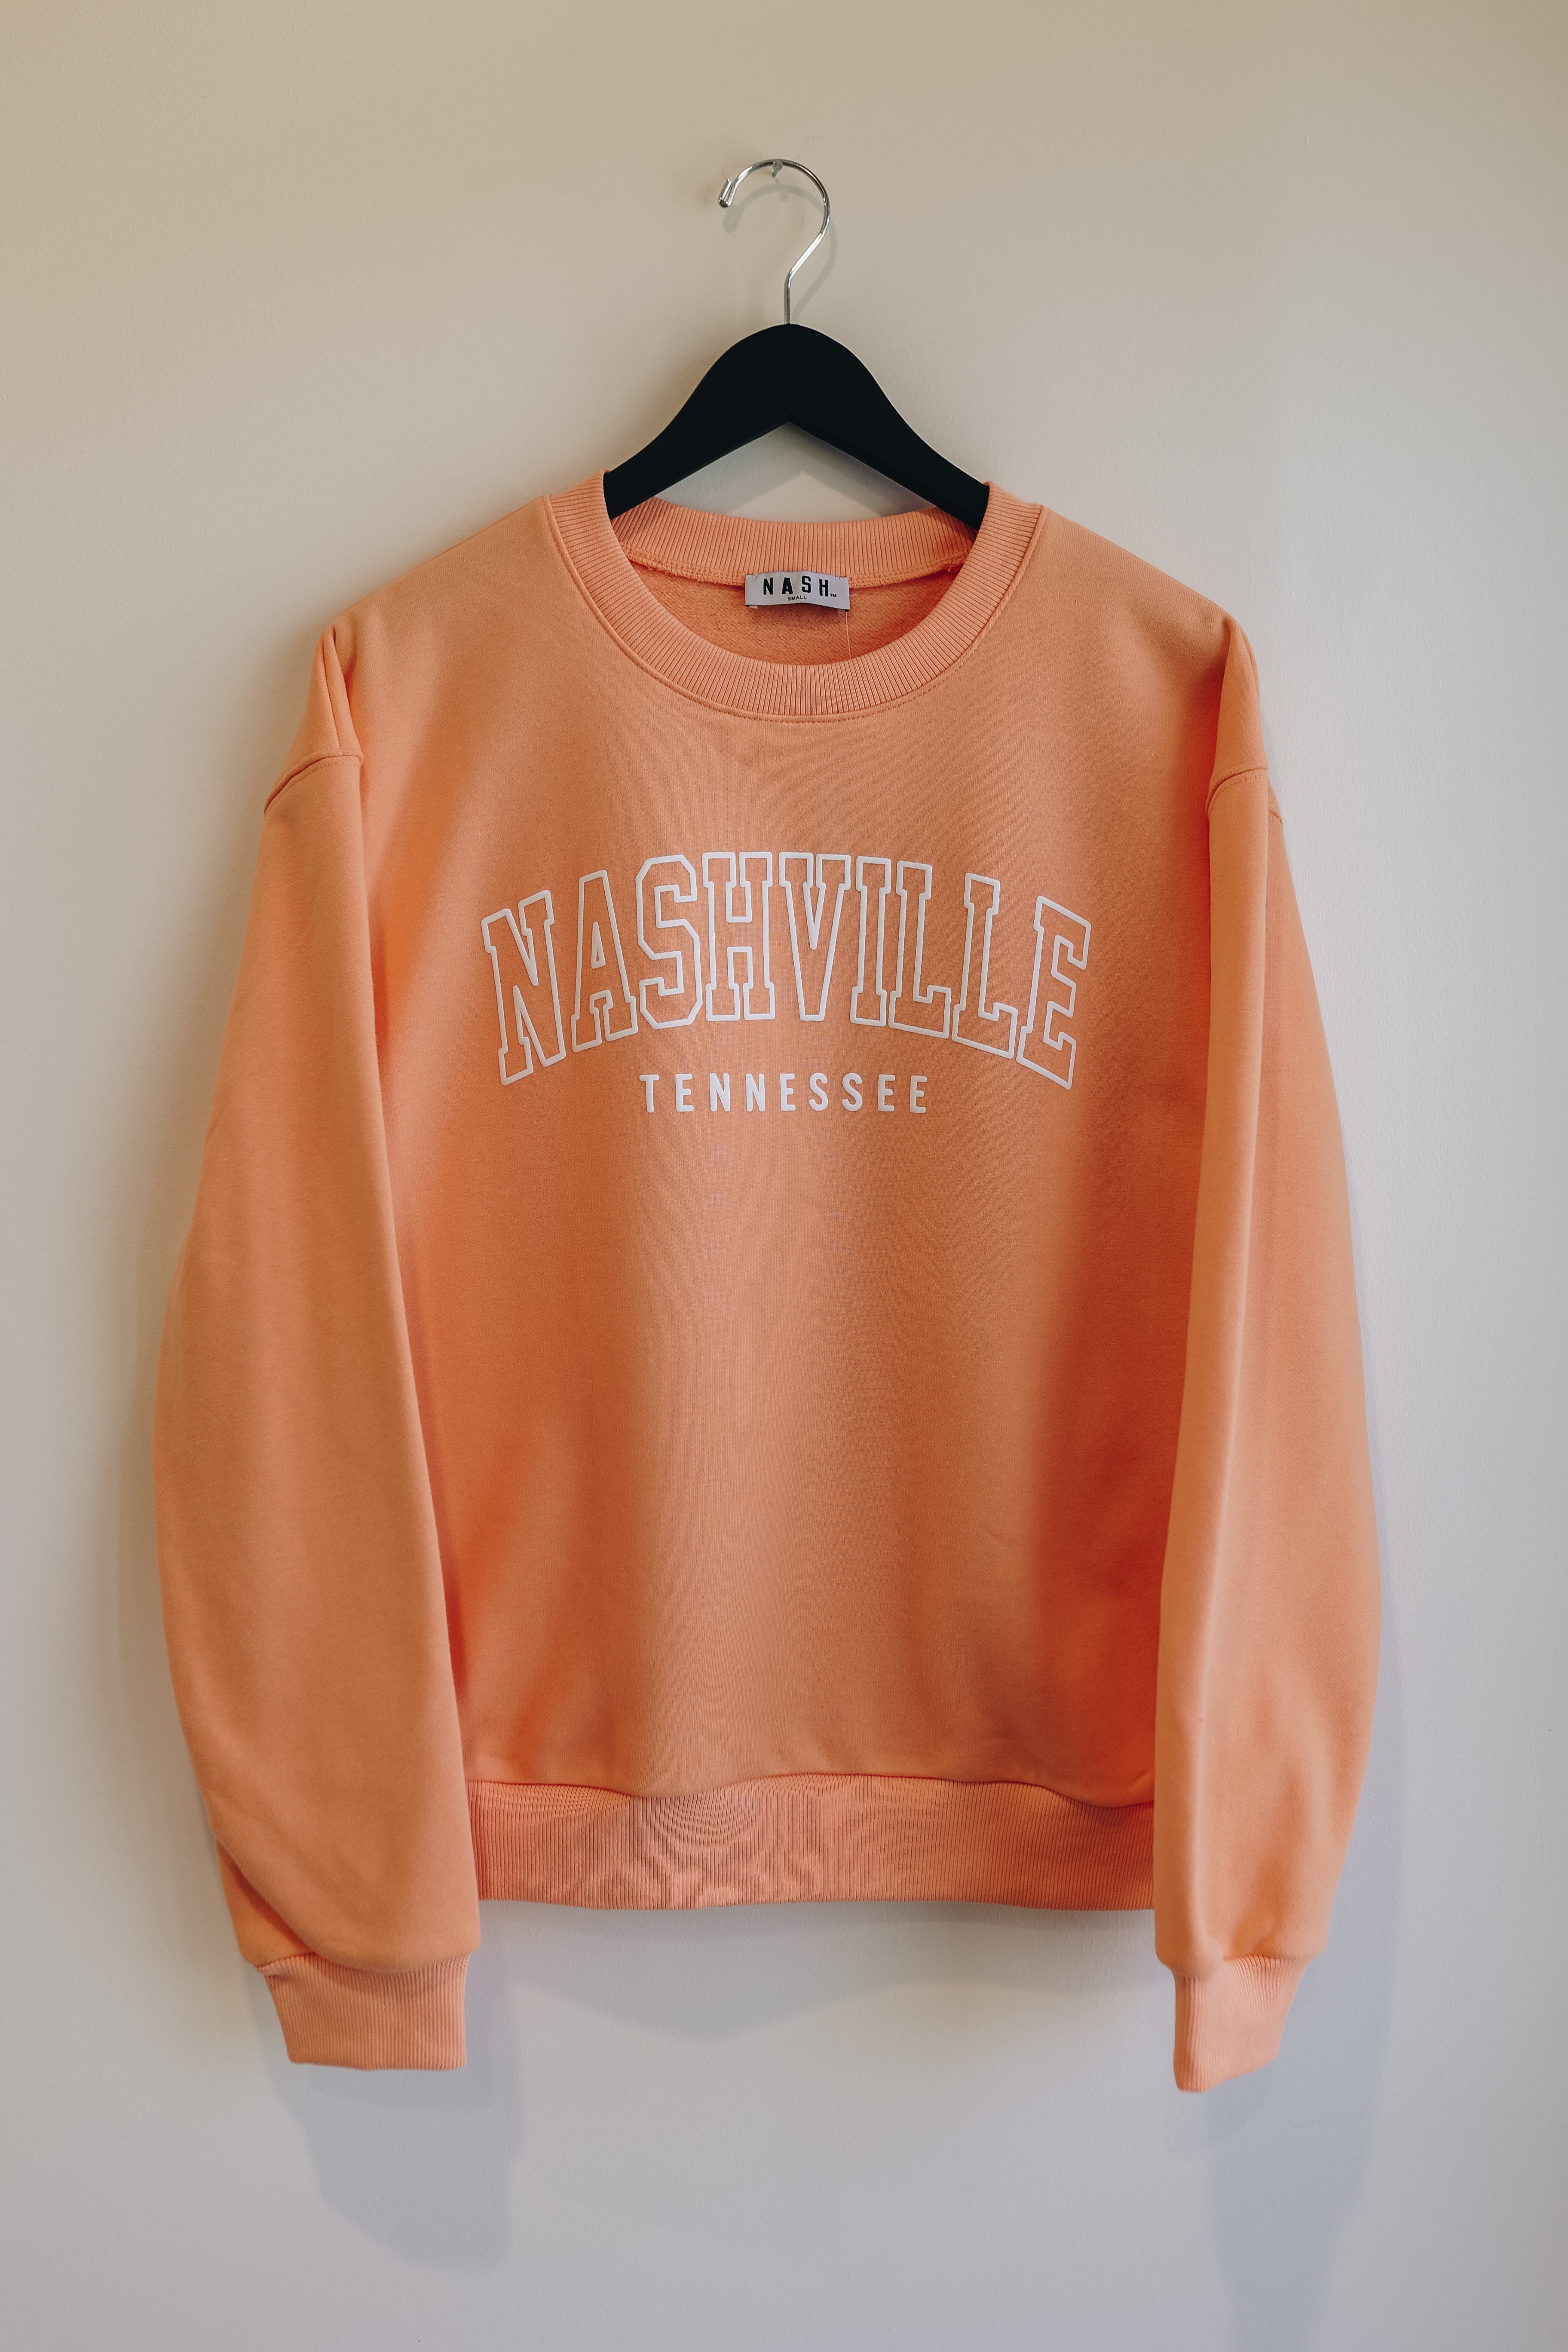 Bright apricot color sweatshirt with collegiate puff ink Nashville on the front